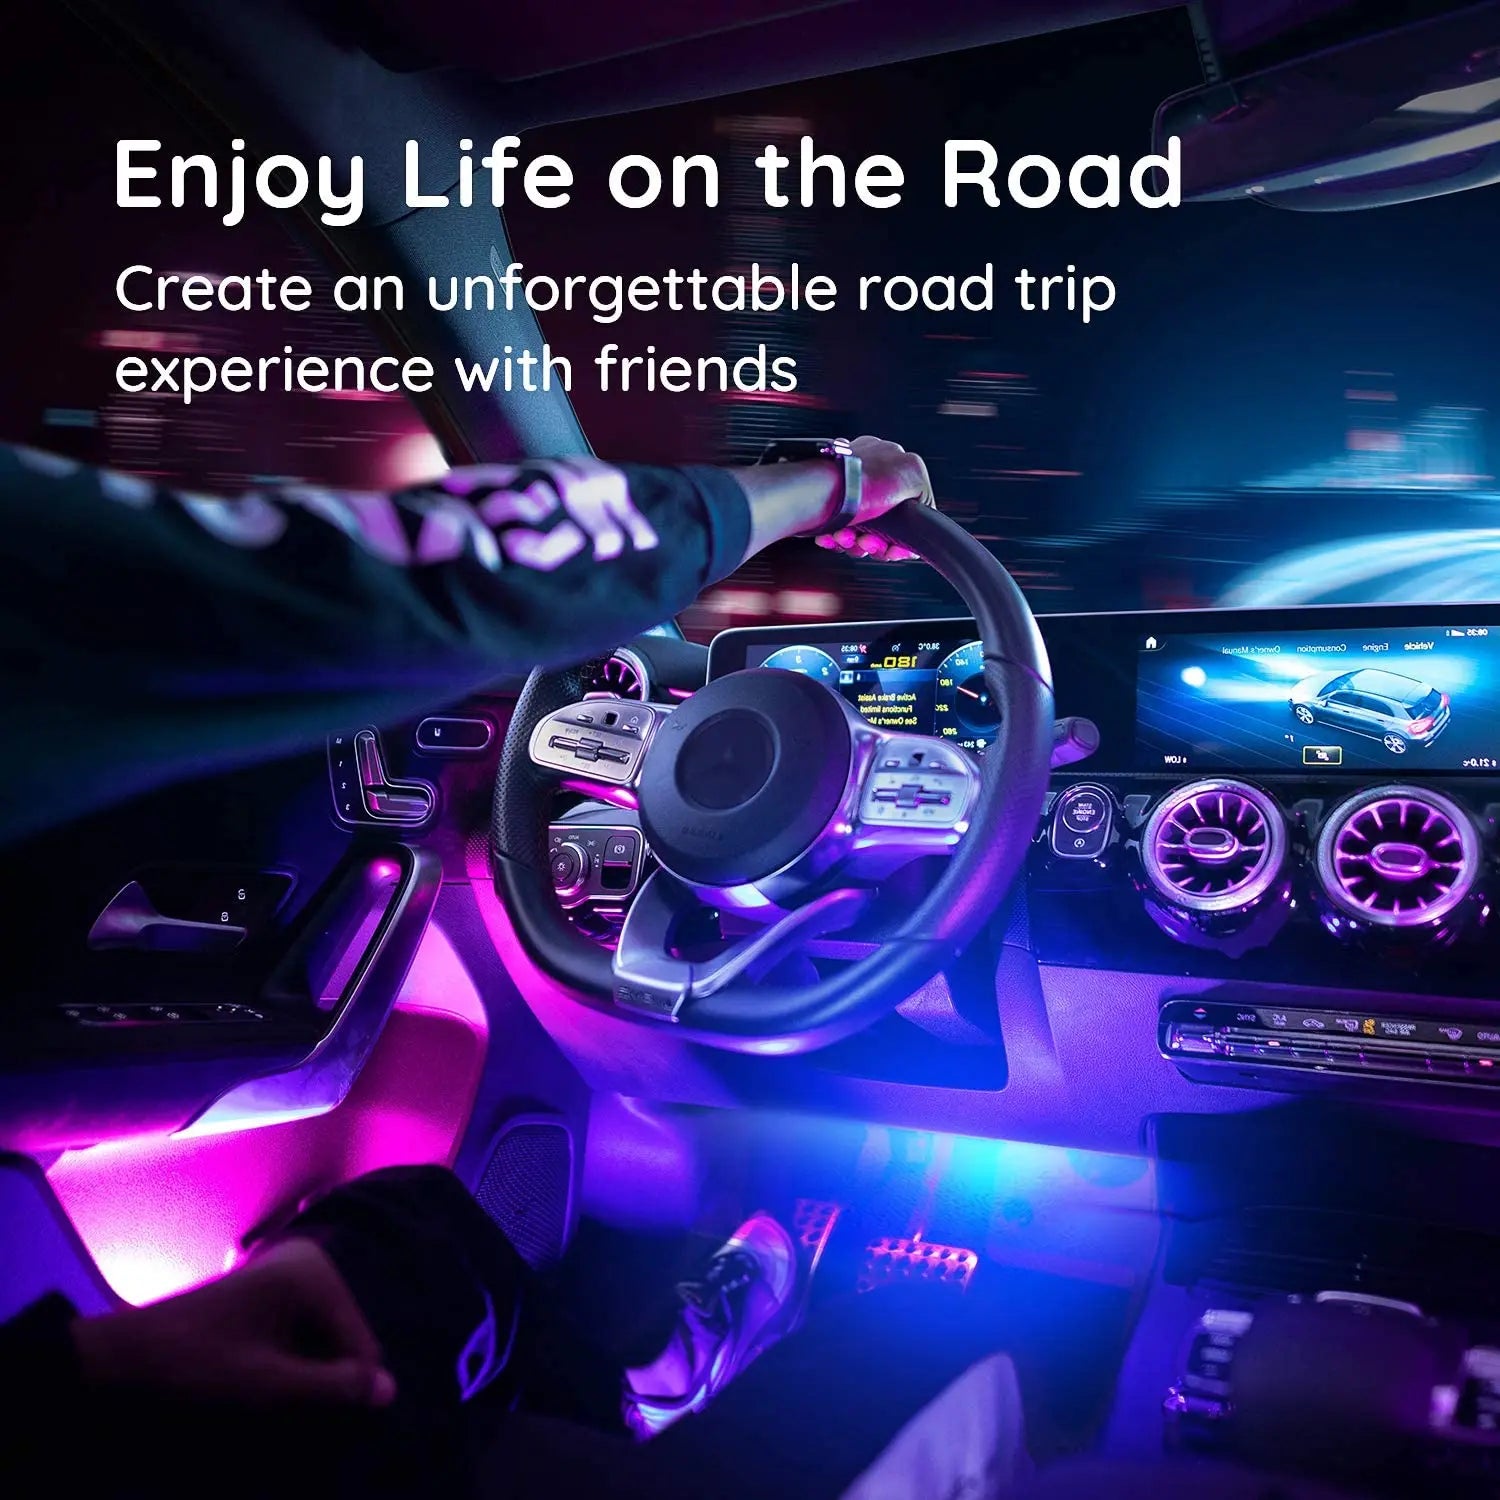 FLASHARK Car LED Strip Light, multi-color music car light strip with waterproof design under colorful lighting kit with voice control function and remote control Flashark